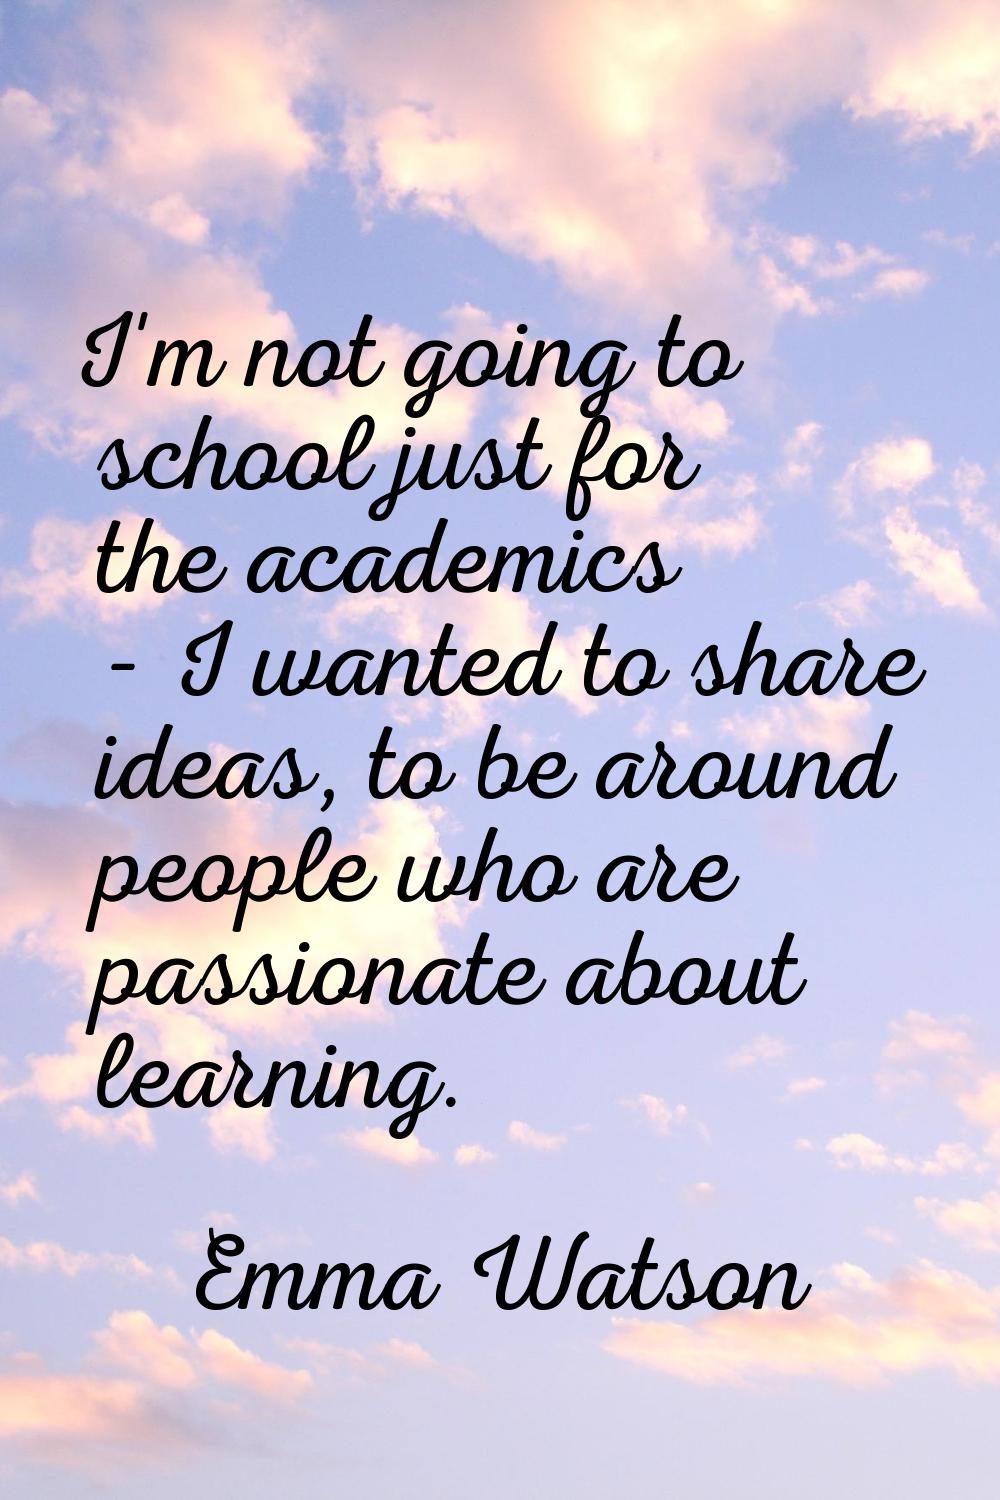 I'm not going to school just for the academics - I wanted to share ideas, to be around people who a